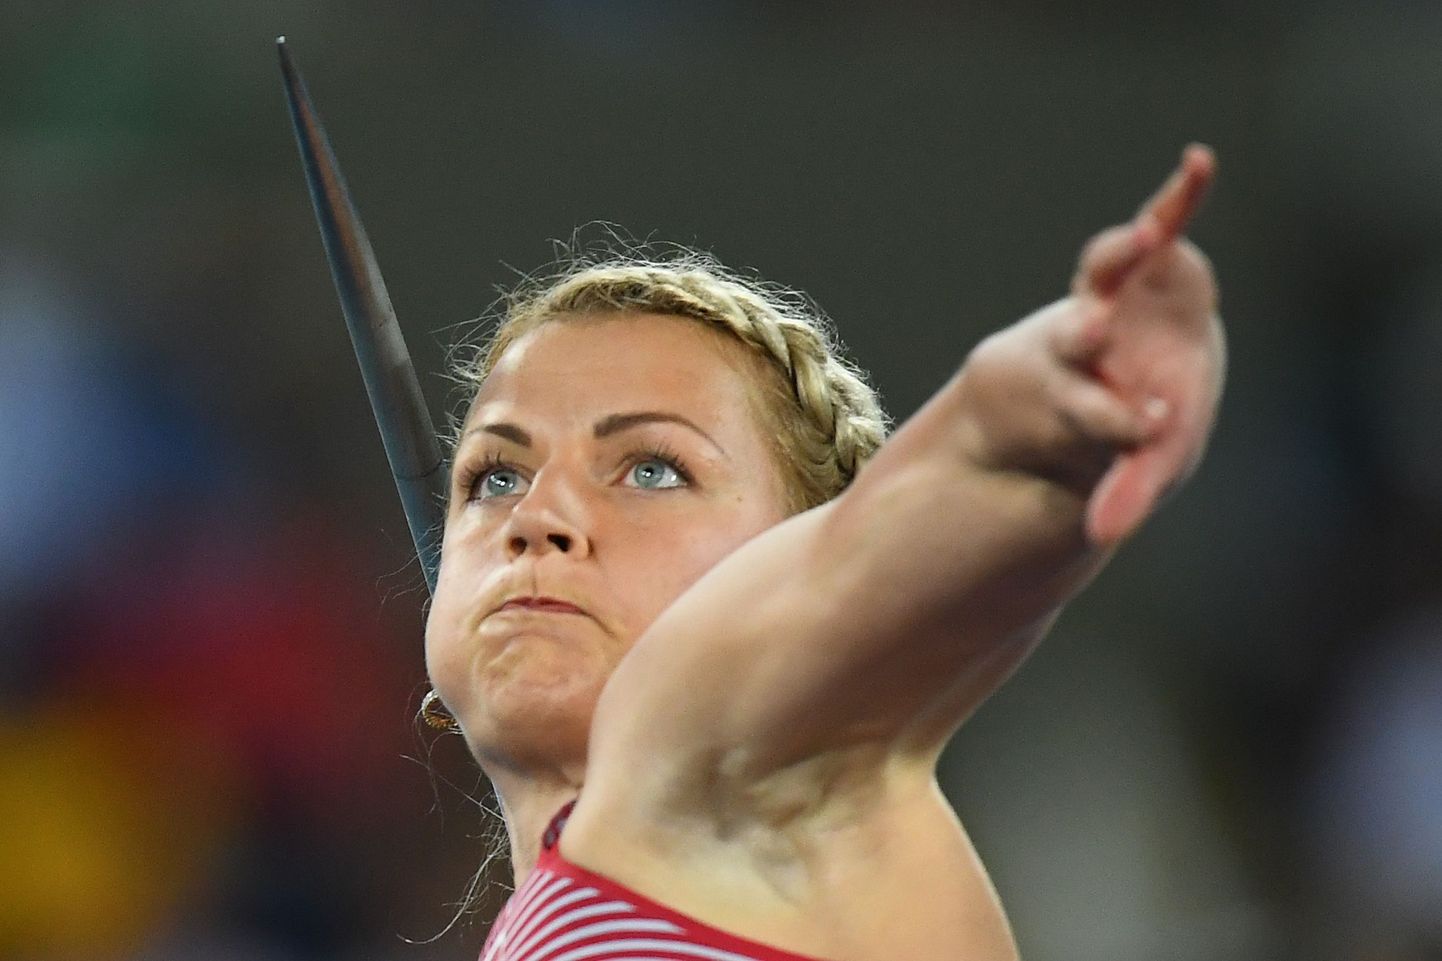 Latvia's Madara Palameika competes in the Women's Javelin Throw Final during the athletics event at the Rio 2016 Olympic Games at the Olympic Stadium in Rio de Janeiro on August 18, 2016.   / AFP PHOTO / FRANCK FIFE